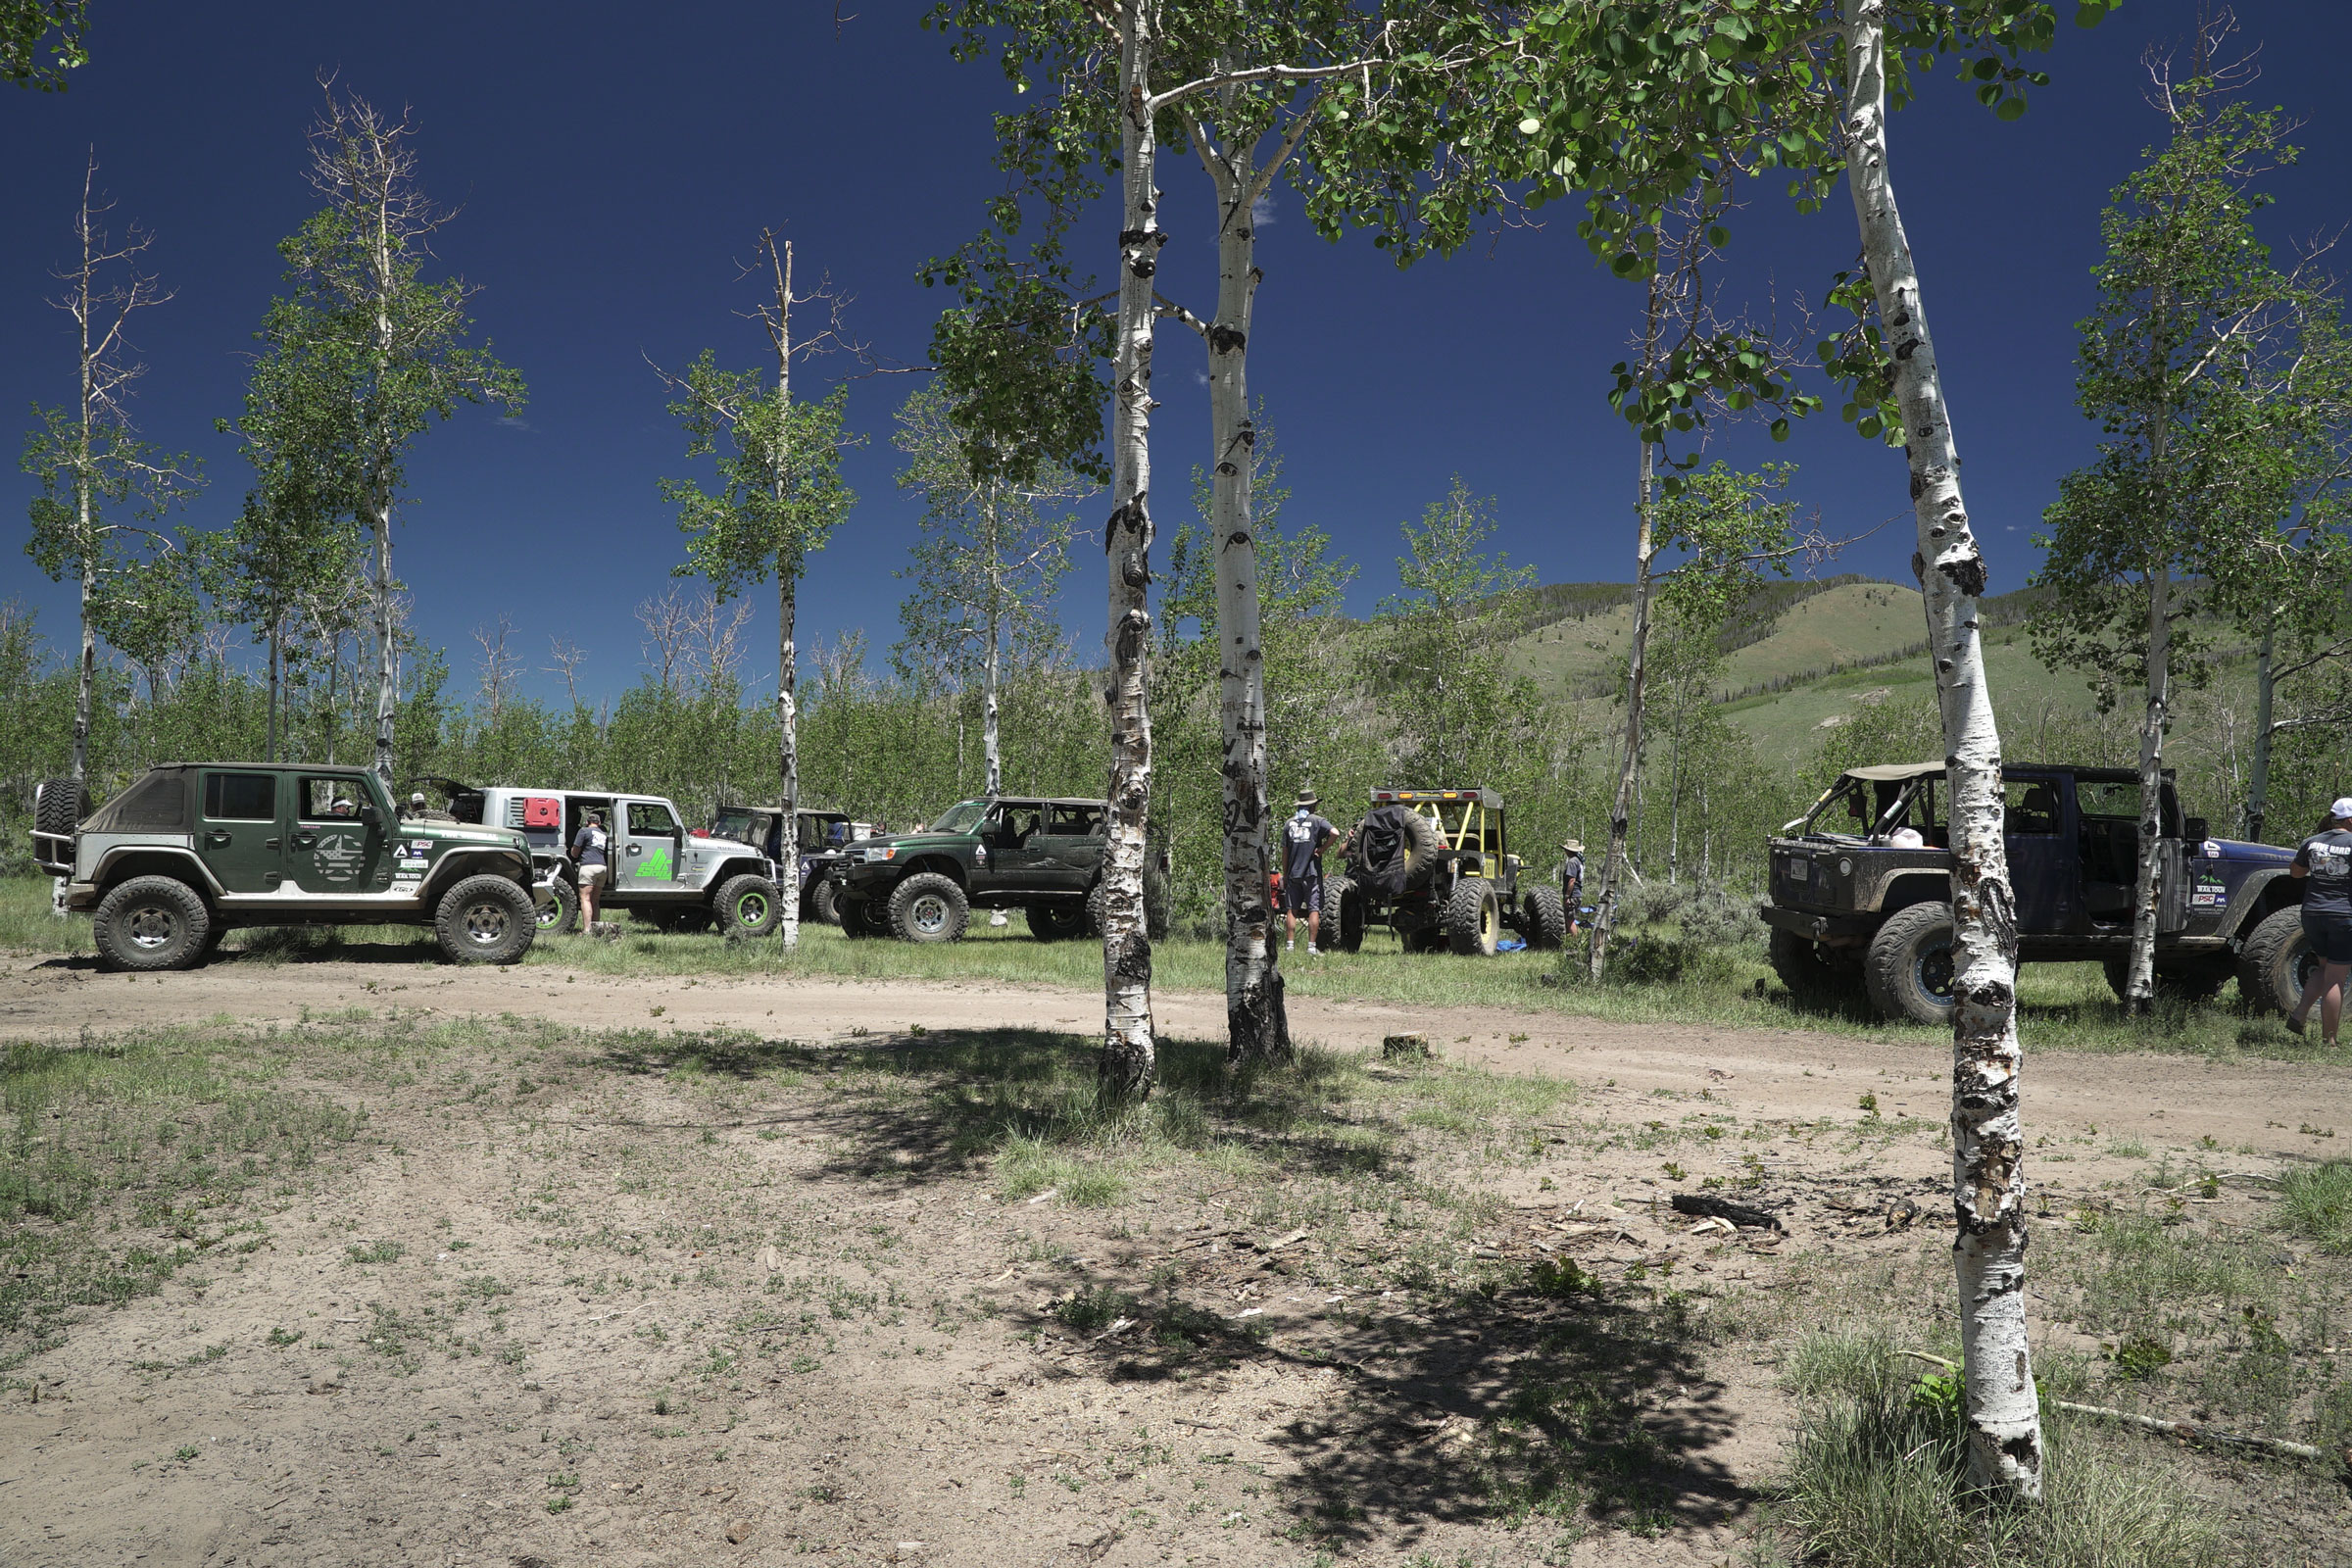 Jeeps at camp at the edge of the woods